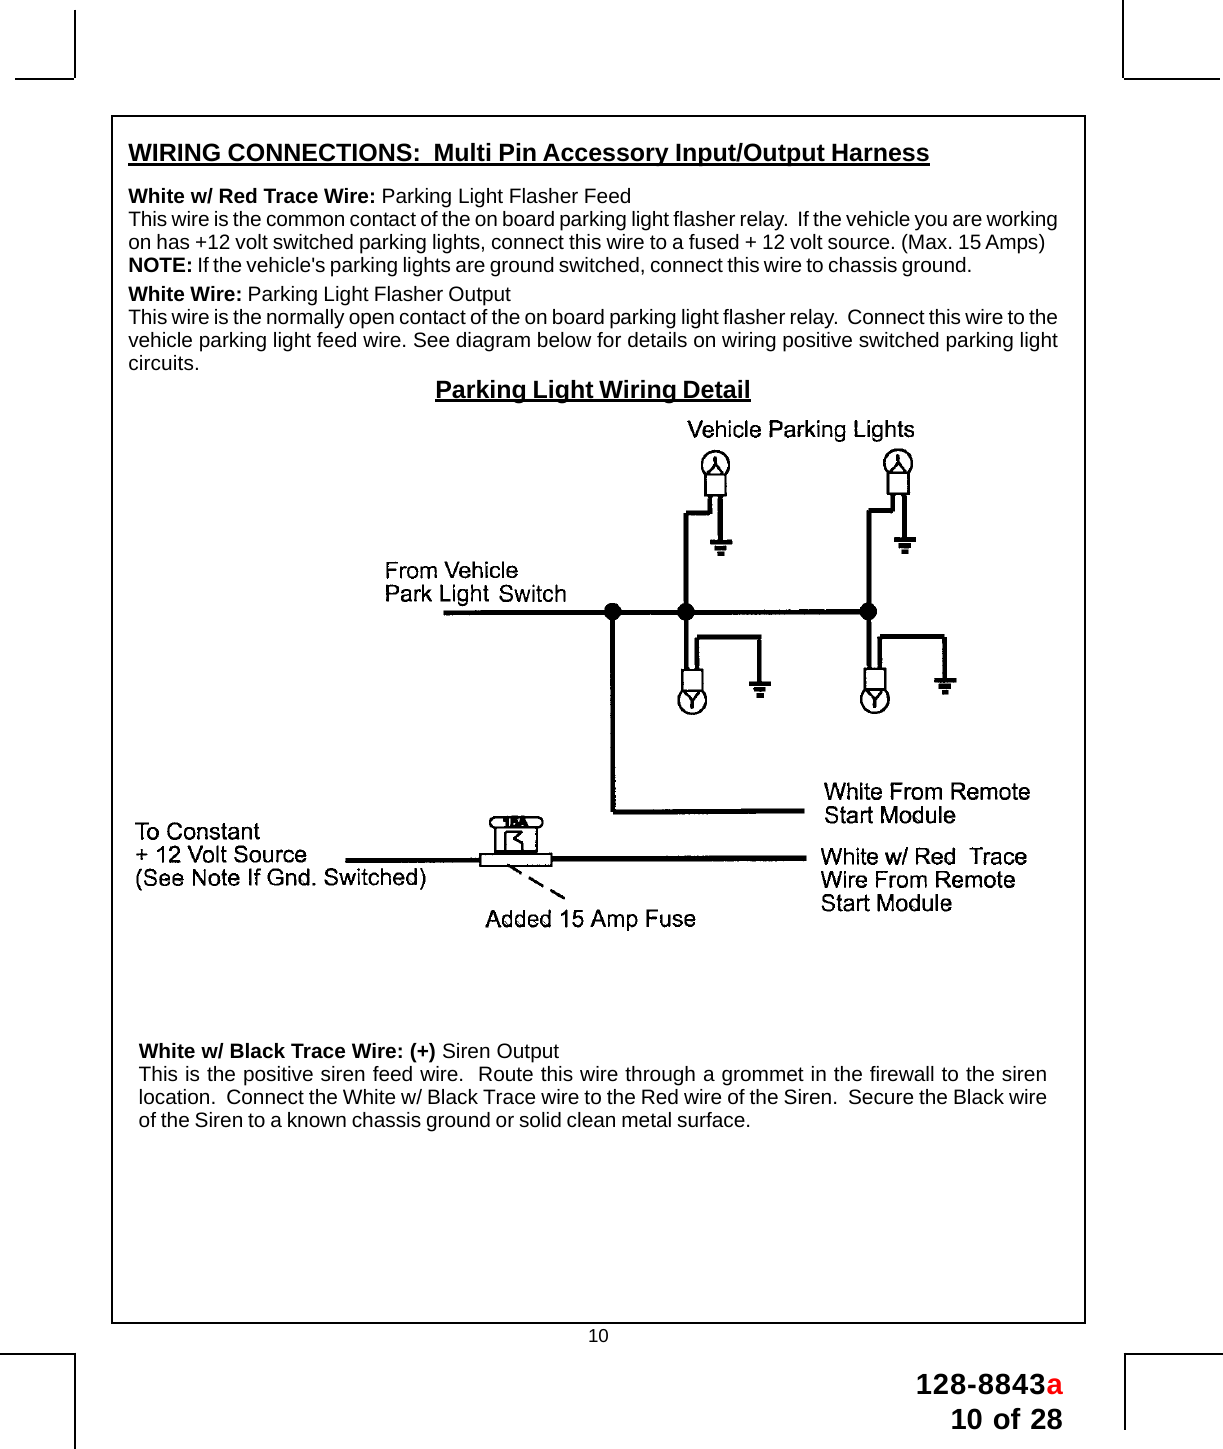 128-8843a10 of 2810White w/ Black Trace Wire: (+) Siren OutputThis is the positive siren feed wire.  Route this wire through a grommet in the firewall to the sirenlocation.  Connect the White w/ Black Trace wire to the Red wire of the Siren.  Secure the Black wireof the Siren to a known chassis ground or solid clean metal surface.WIRING CONNECTIONS:  Multi Pin Accessory Input/Output HarnessWhite w/ Red Trace Wire: Parking Light Flasher FeedThis wire is the common contact of the on board parking light flasher relay.  If the vehicle you are workingon has +12 volt switched parking lights, connect this wire to a fused + 12 volt source. (Max. 15 Amps)NOTE: If the vehicle&apos;s parking lights are ground switched, connect this wire to chassis ground.White Wire: Parking Light Flasher OutputThis wire is the normally open contact of the on board parking light flasher relay.  Connect this wire to thevehicle parking light feed wire. See diagram below for details on wiring positive switched parking lightcircuits. Parking Light Wiring Detail